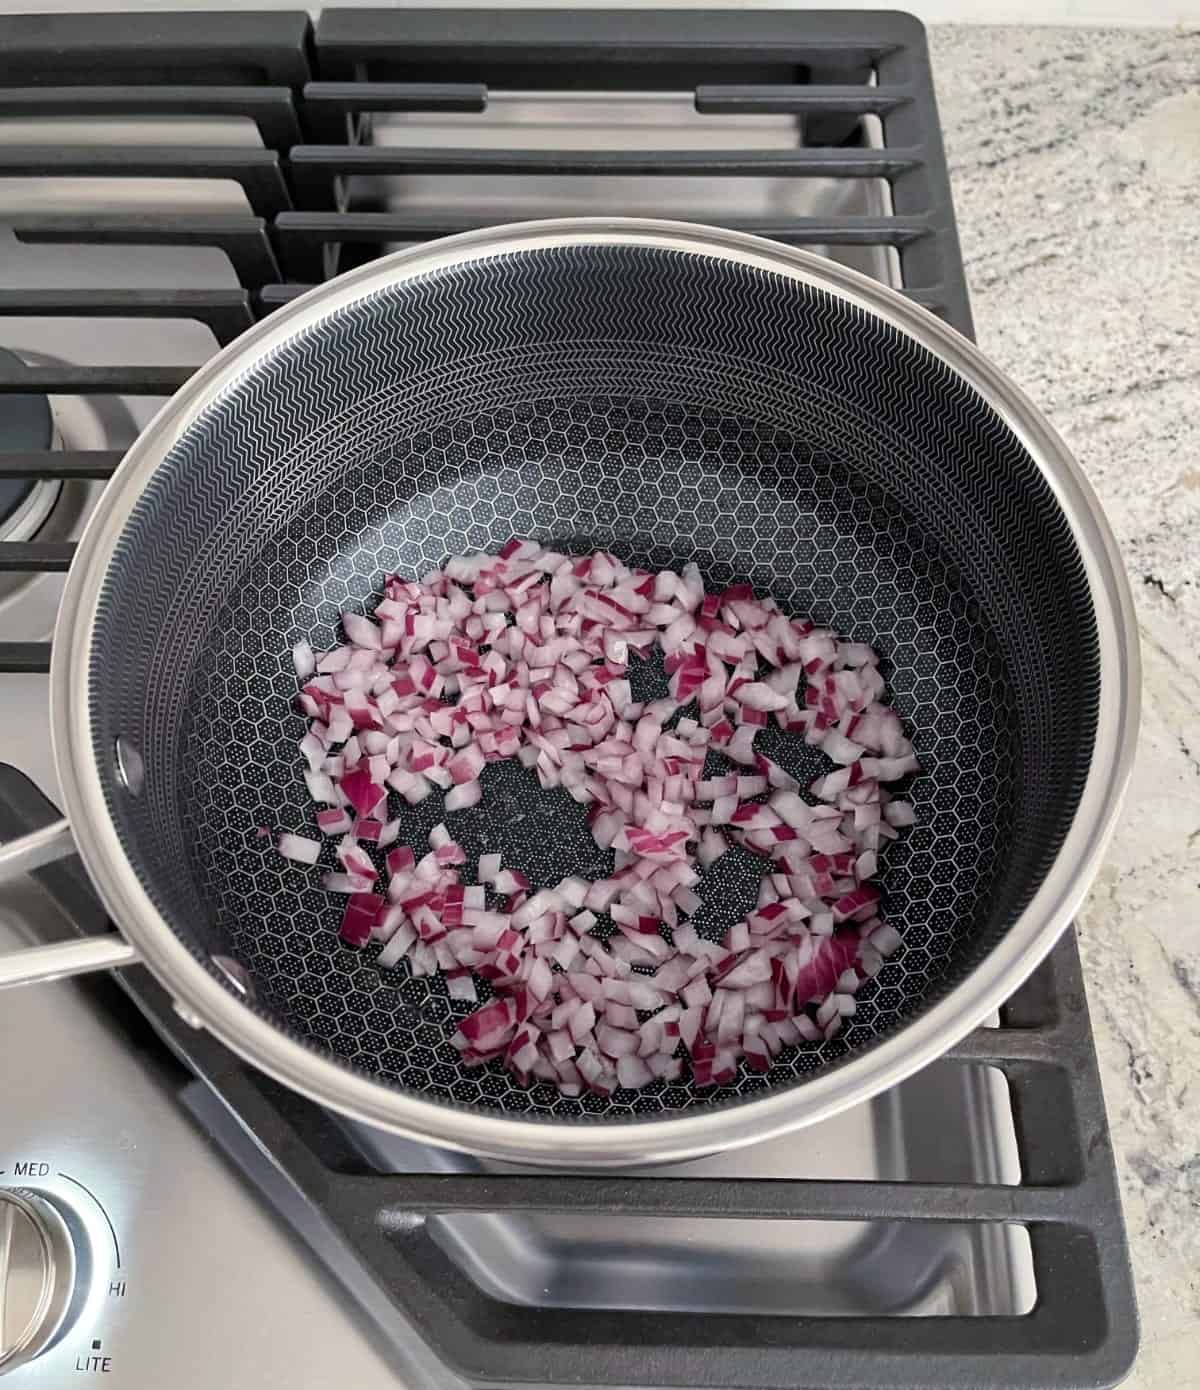 Sauteeing chopped red onion in saucepan on stovetop.